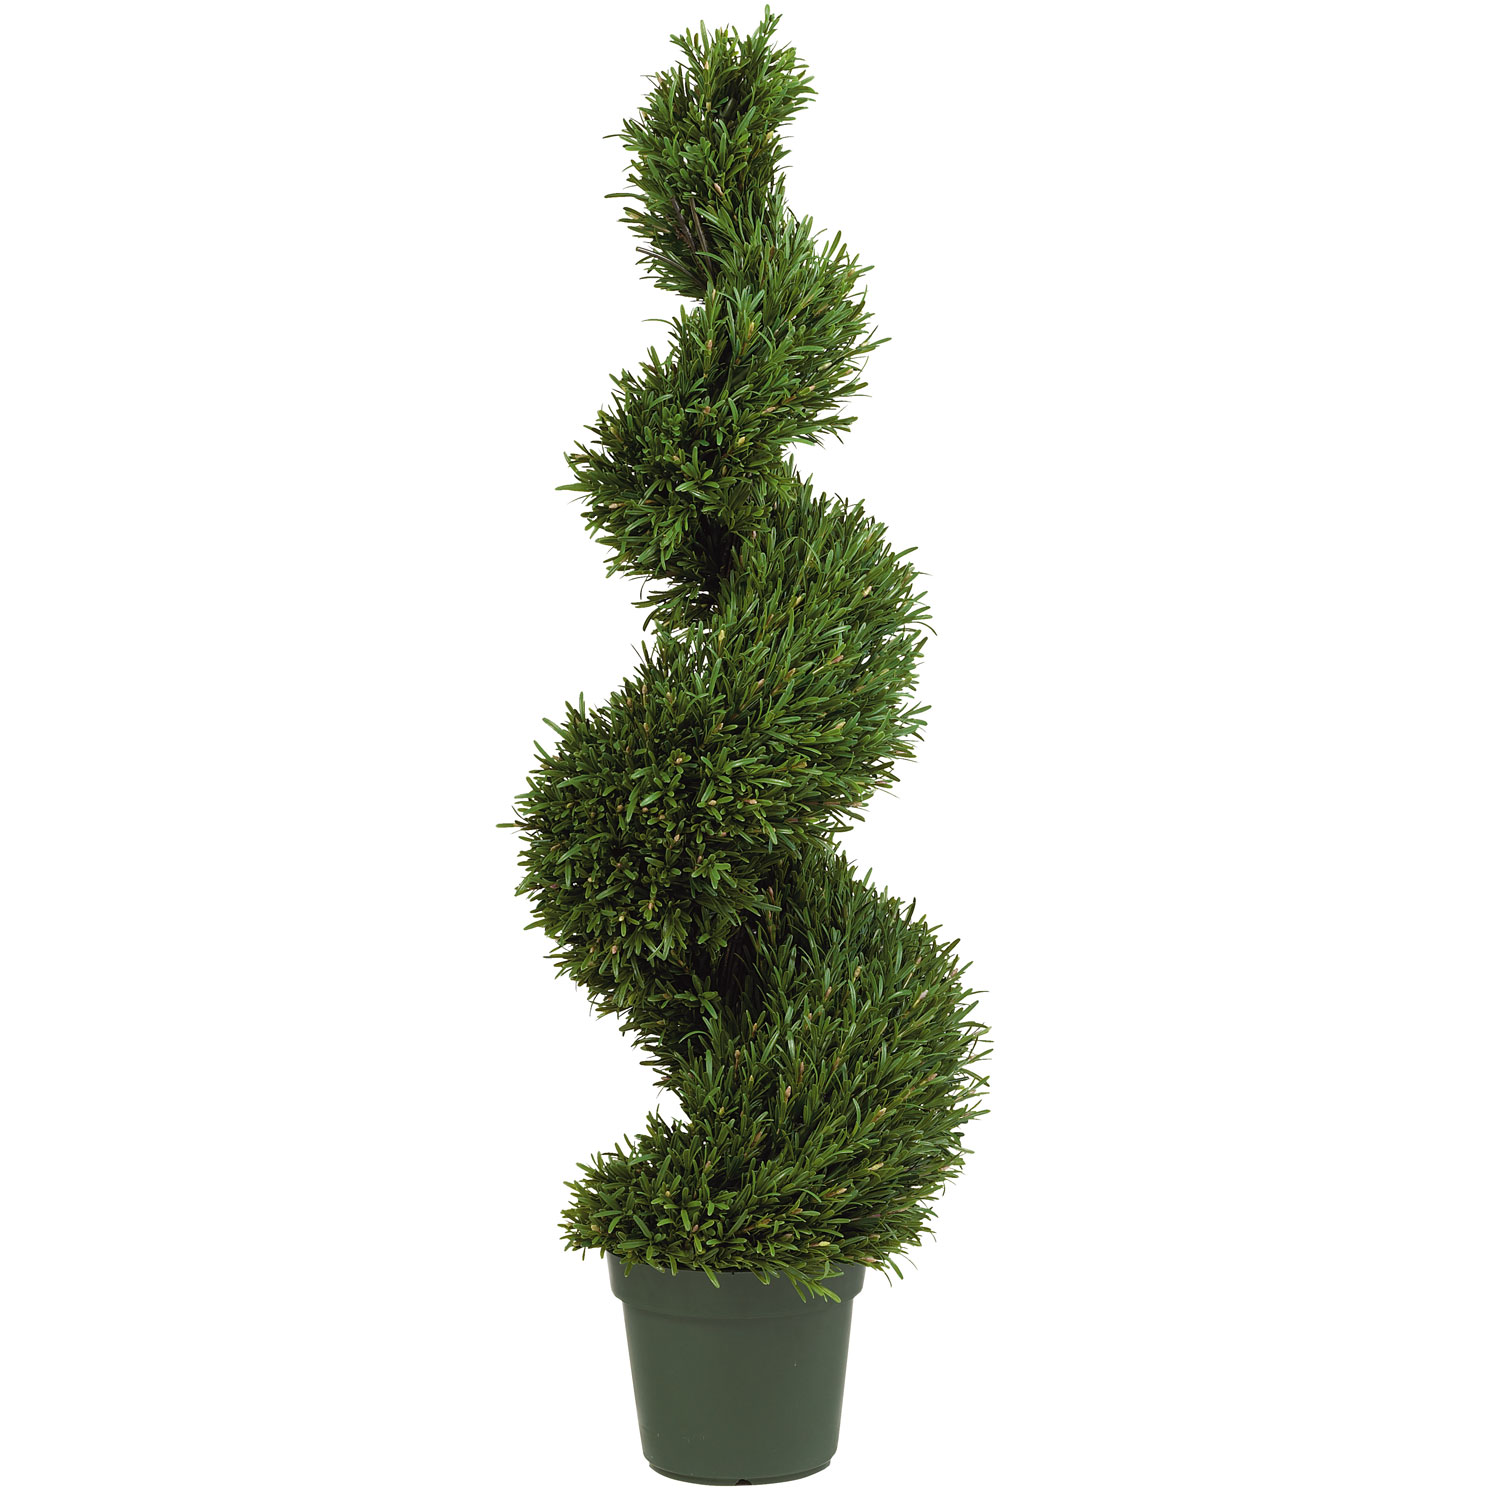 4 Foot Rosemary Spiral Topiary: Potted